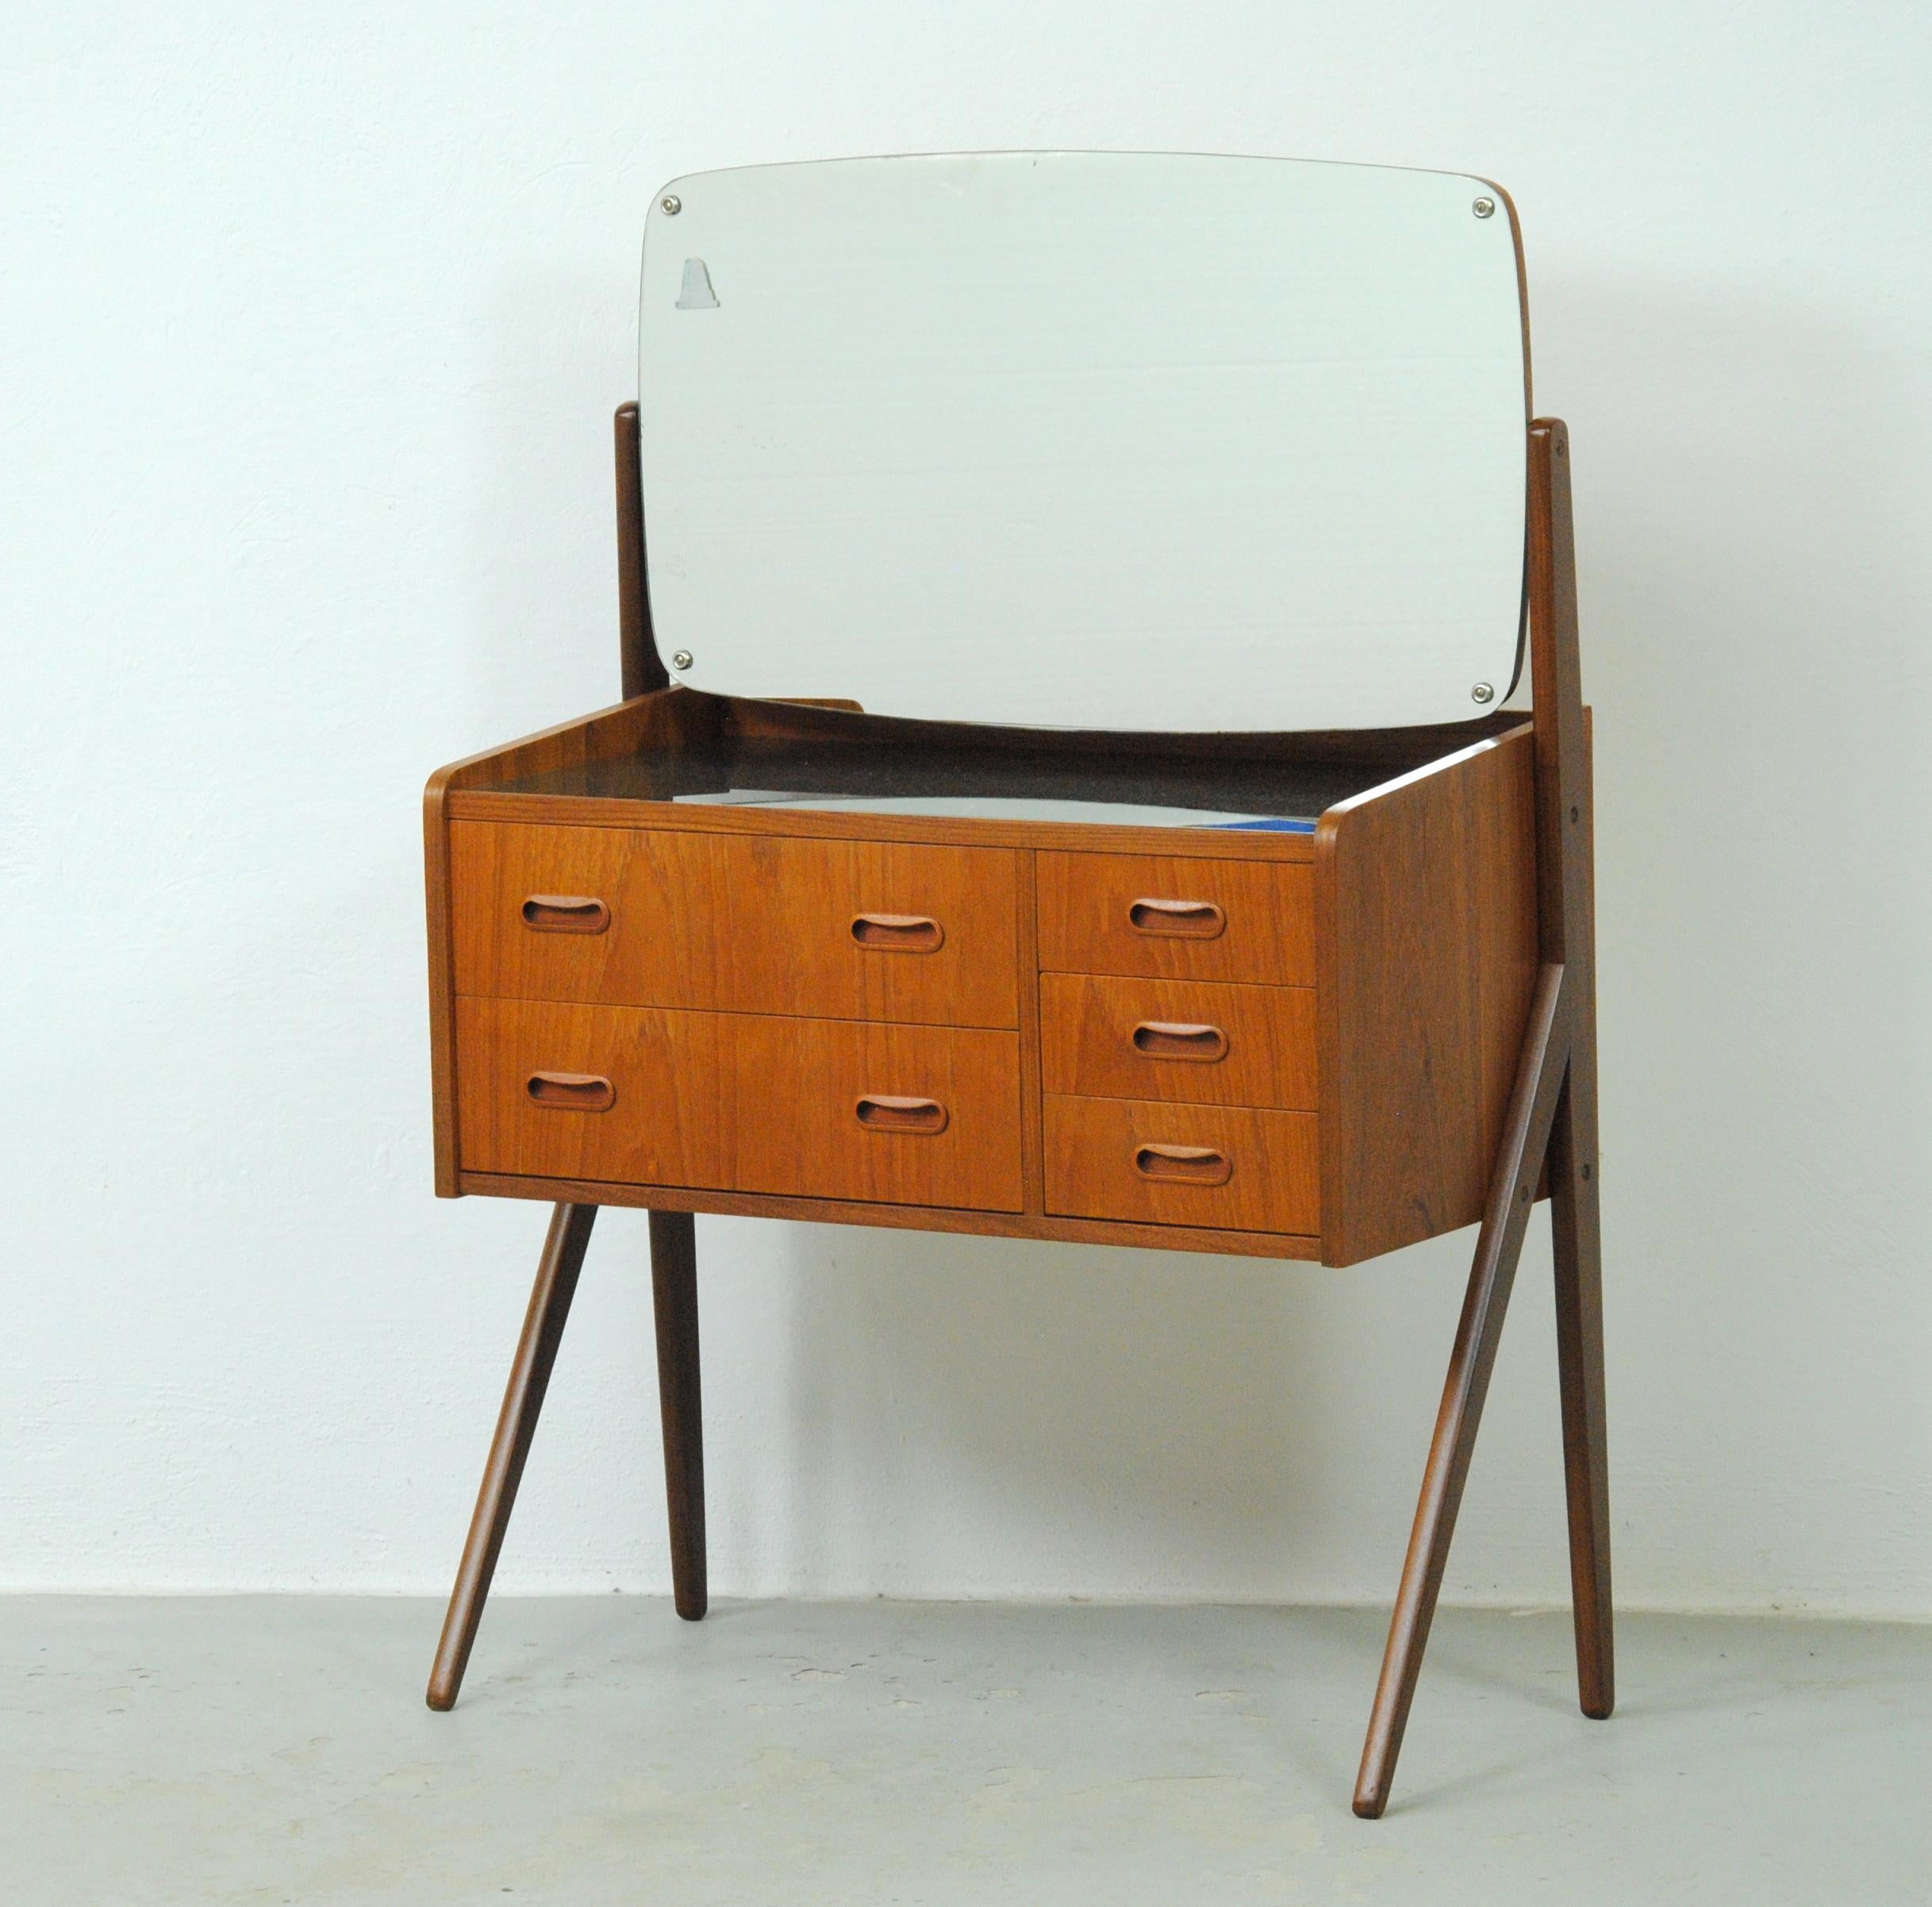 Danish teak dressing - vanity table from the 1960s.

The vanity table features a large adjustable mirror, an original black glass table top and 5 spacious drawers with room for what you need at the vanity table.

The table has been fully